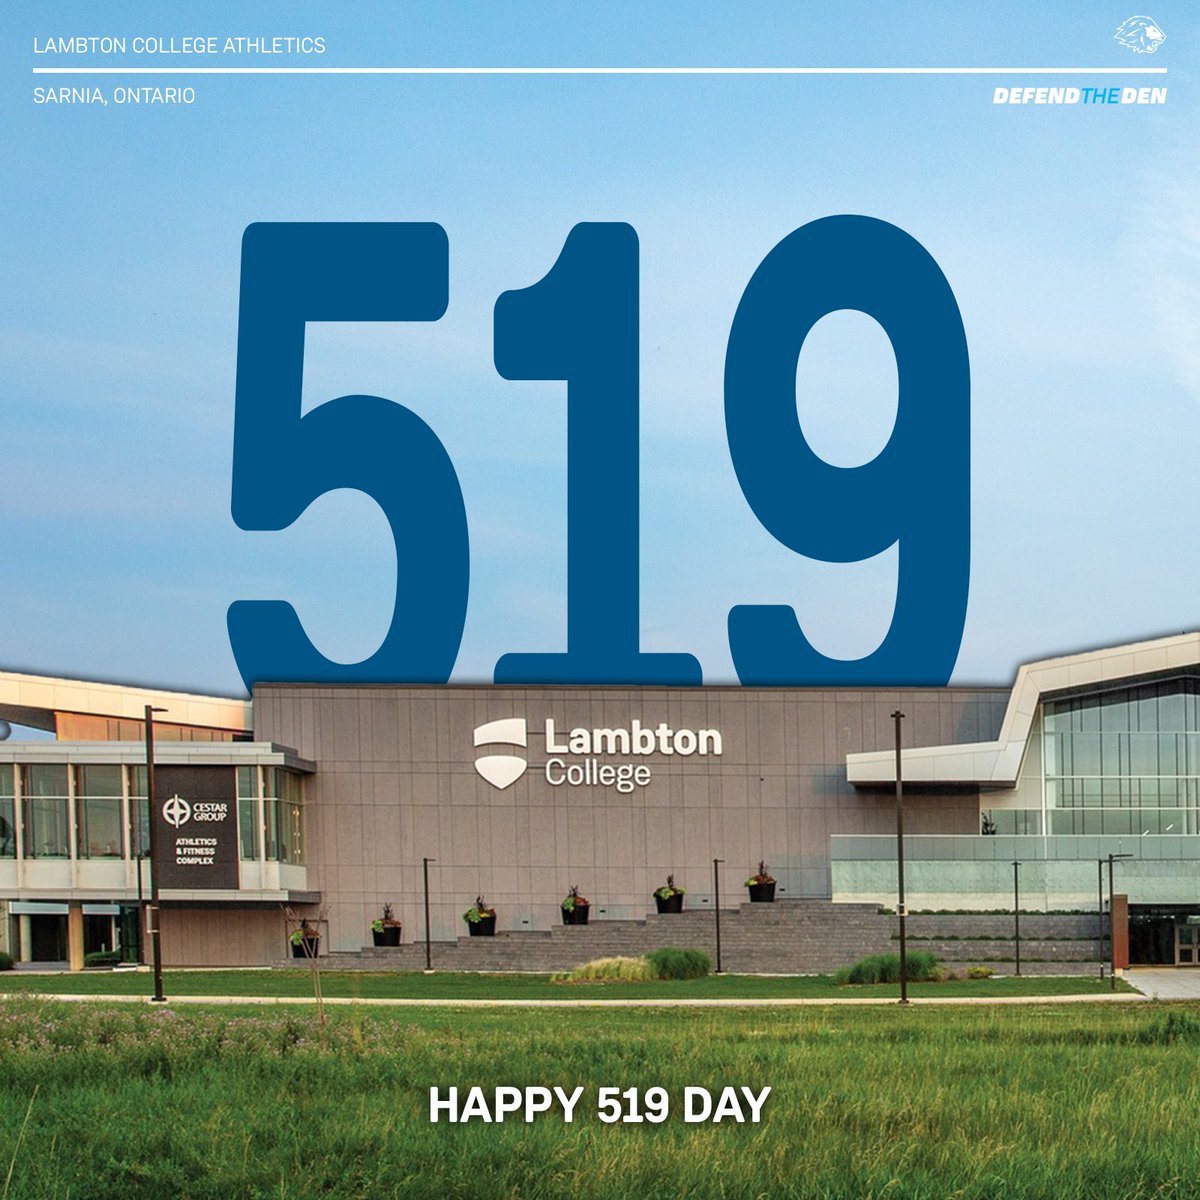 There's no place like home.

Happy 519 Day, Lions!

#DefendTheDen